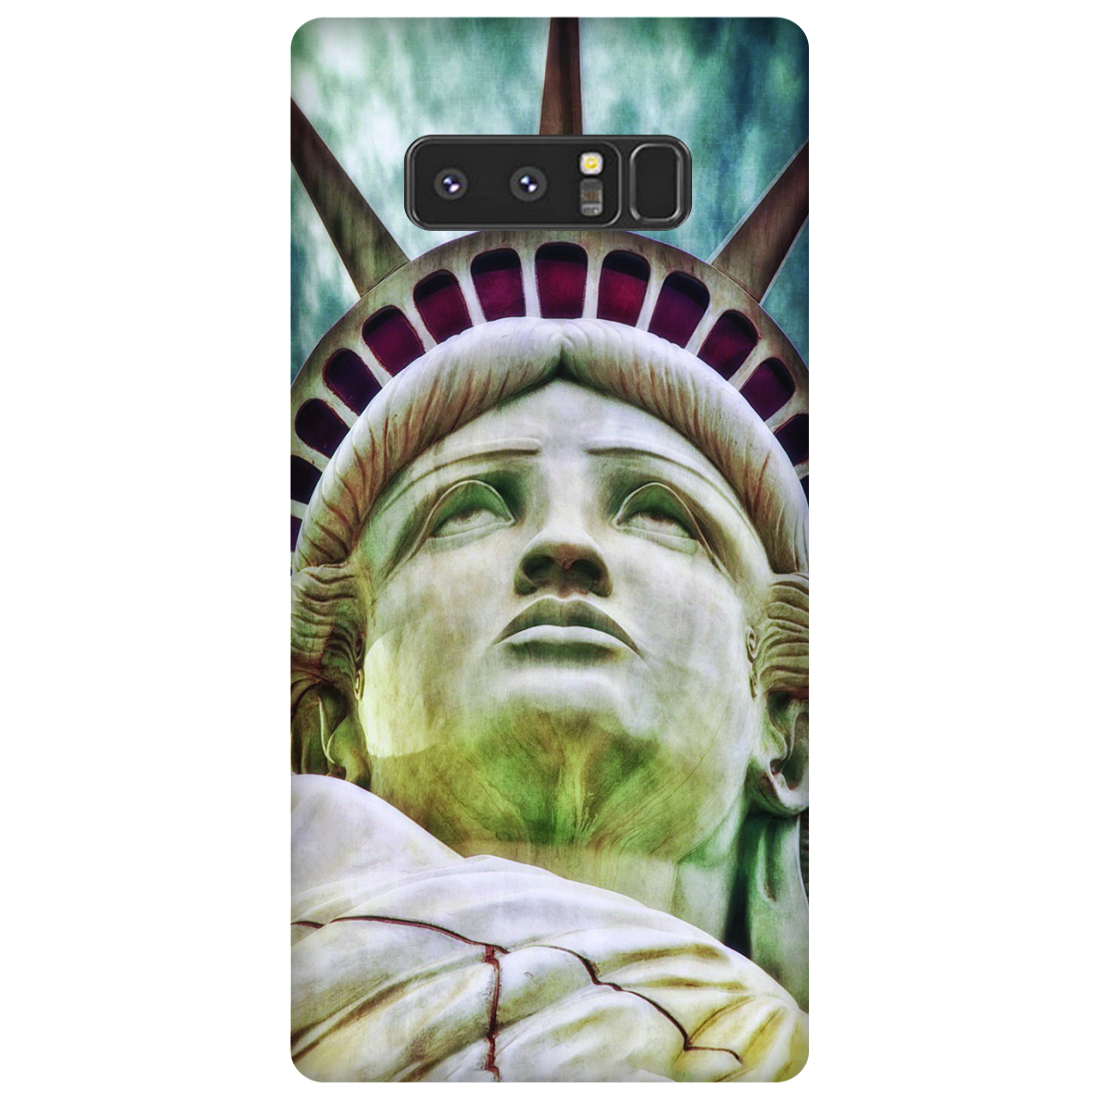 Statue of Liberty Case Samsung Galaxy Note 8